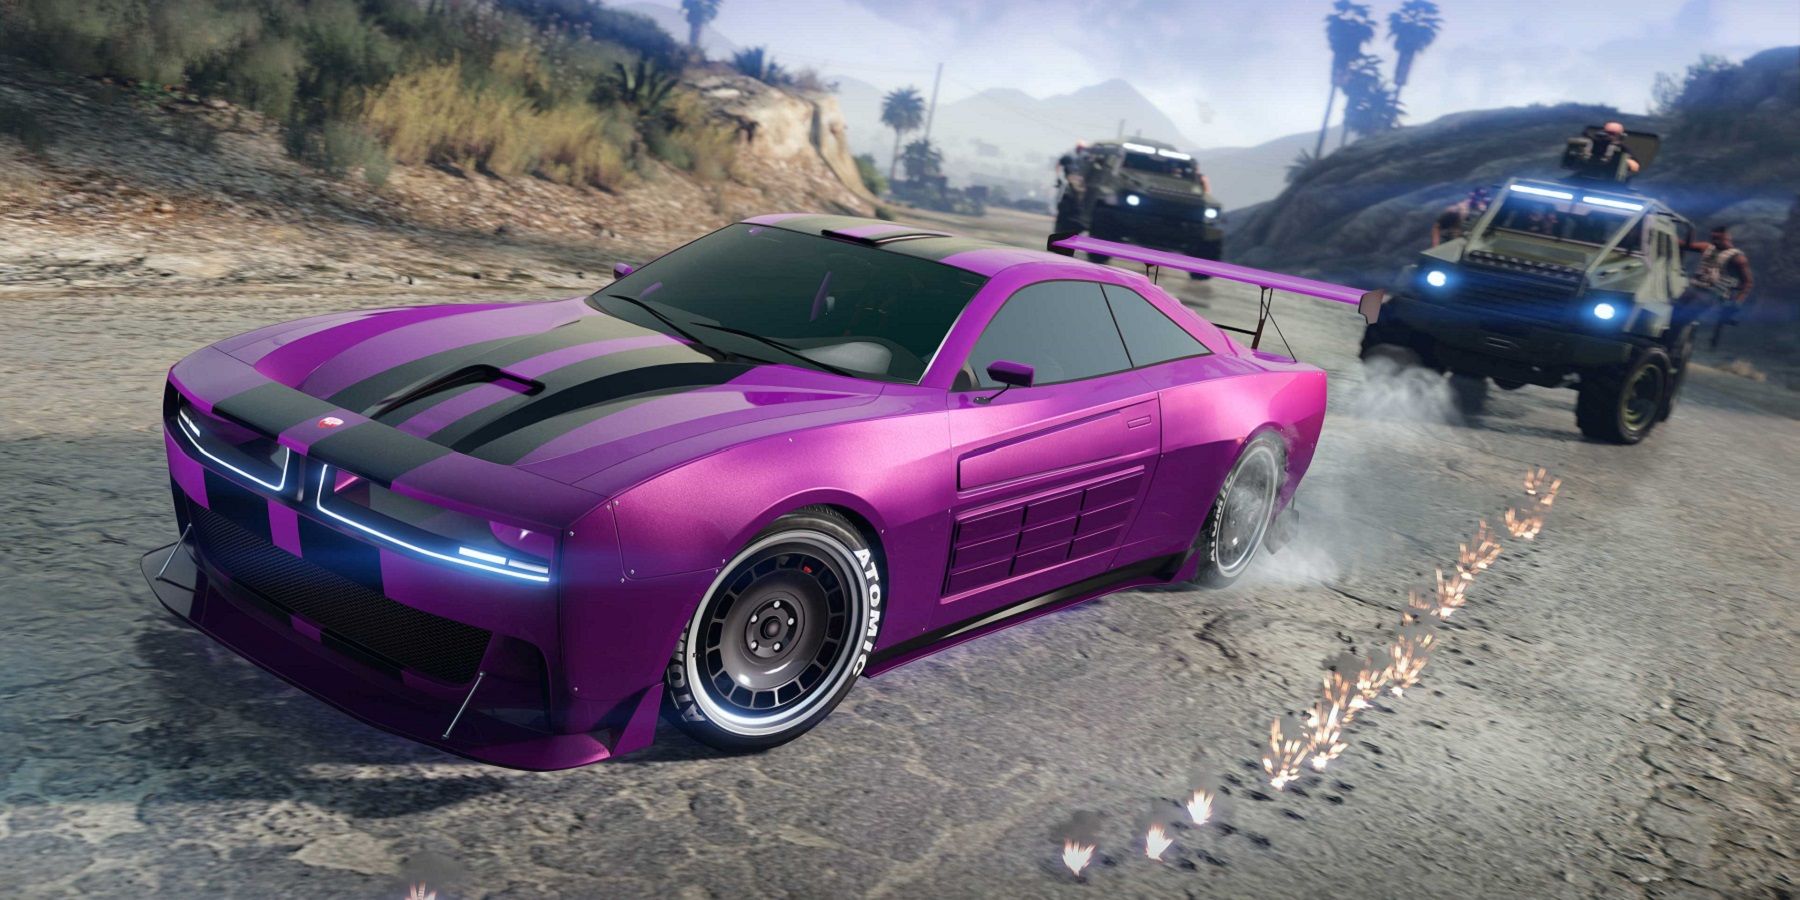 Image from Grand Theft Auto 5 showing a purple car in a police chase.